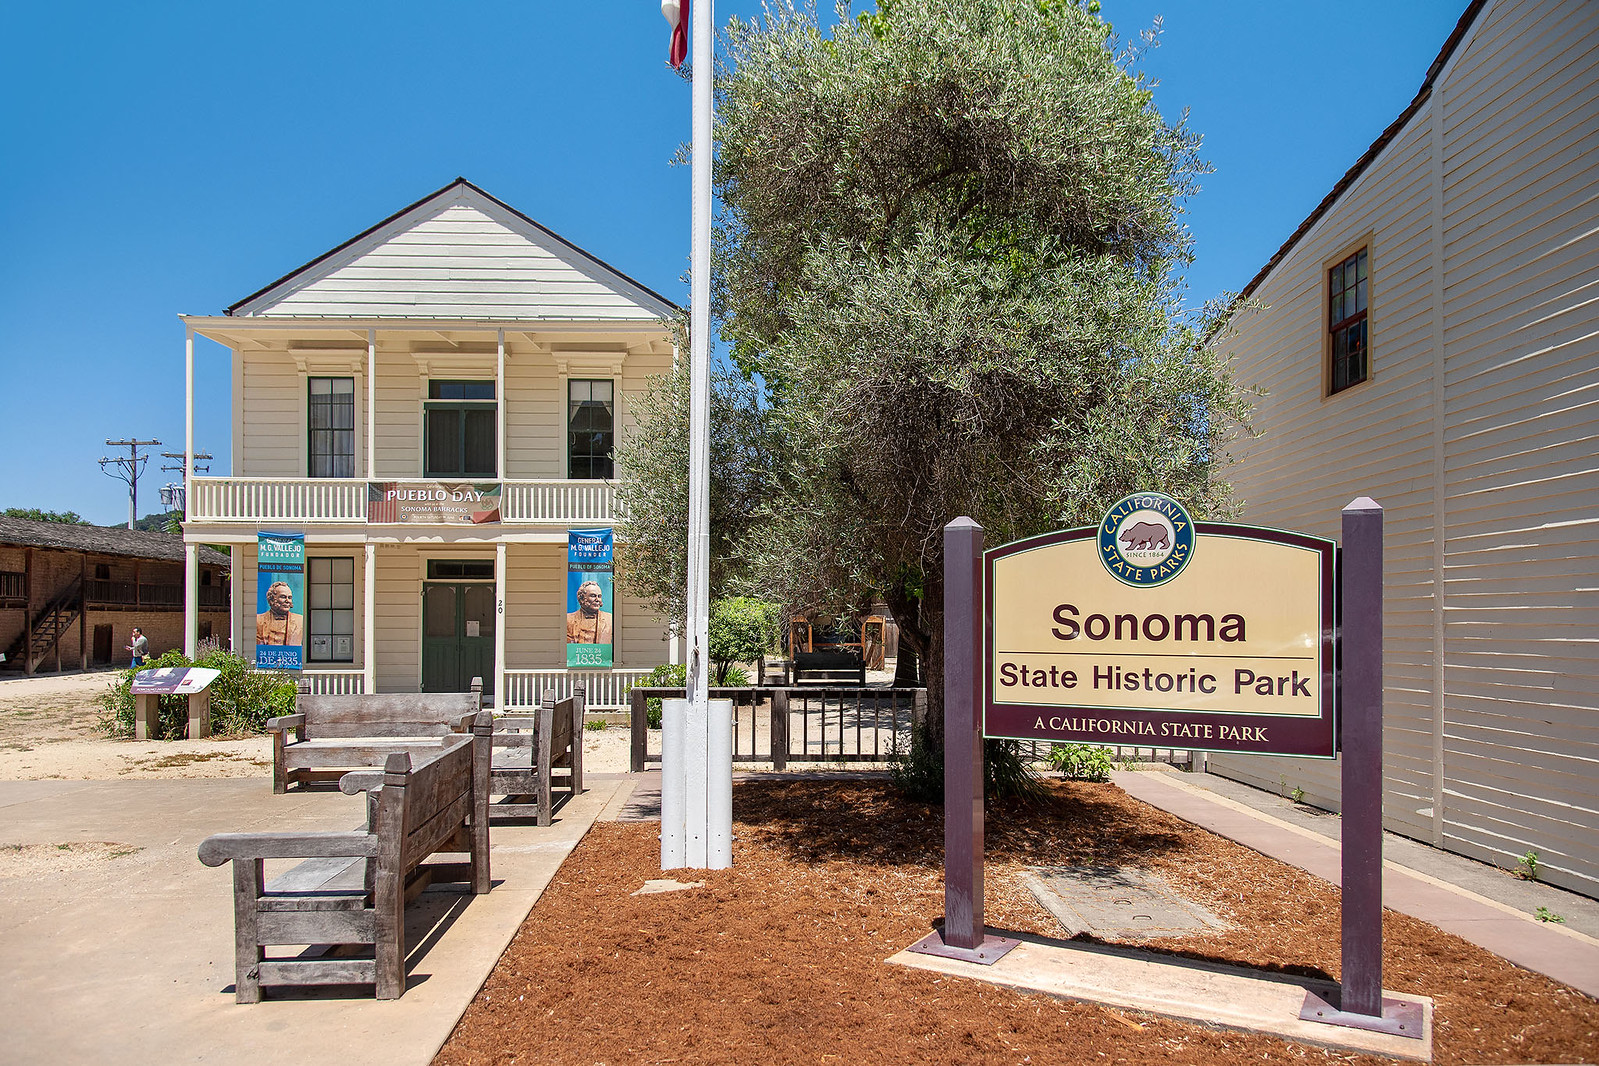 Cover Image for 18121 California Court, Sonoma presented by Daniel Casabonne